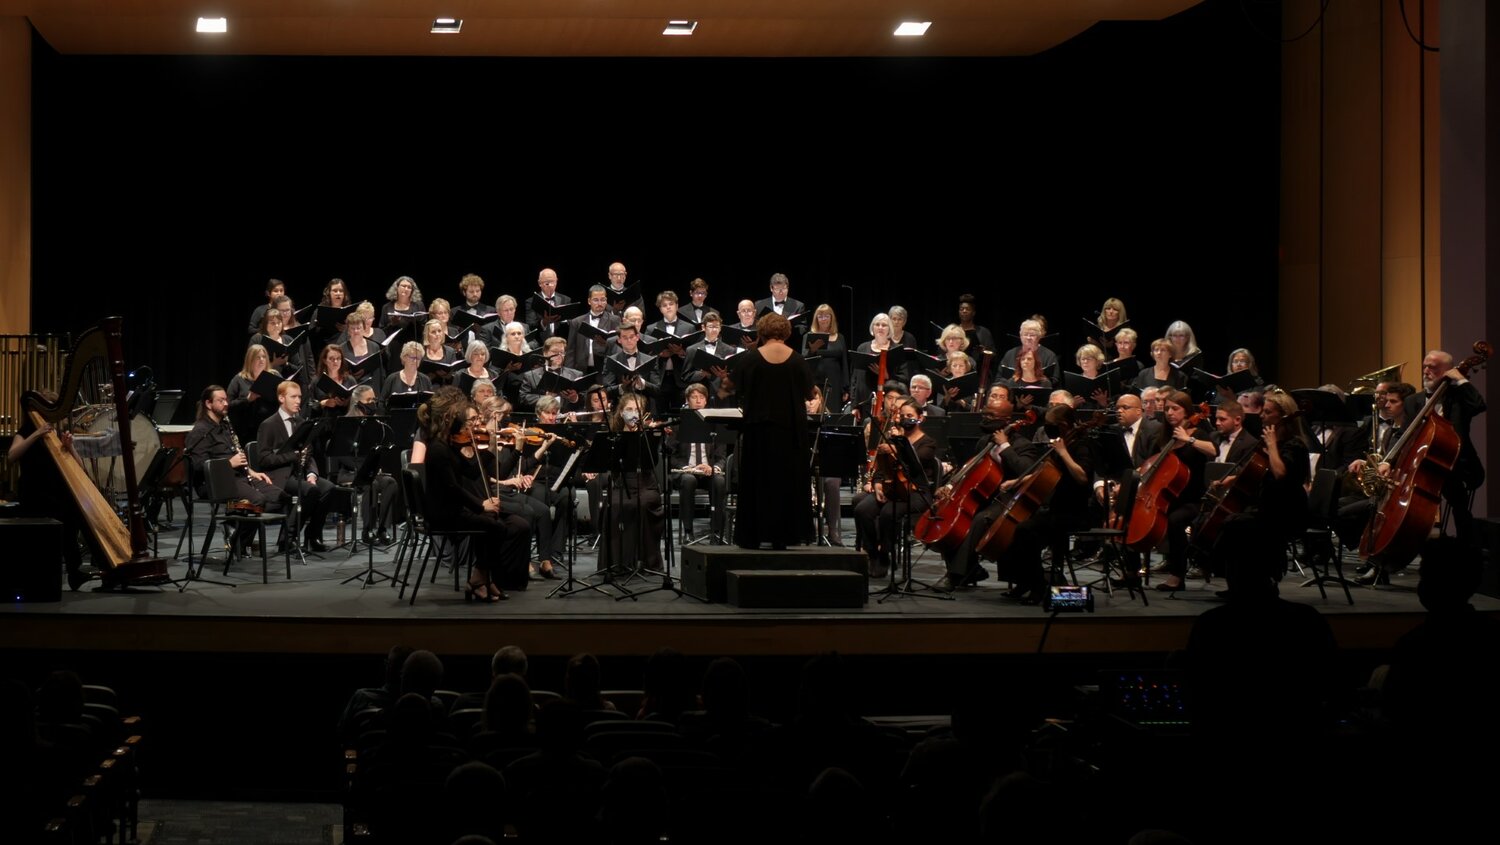 Since its founding in 2003, ProMusica Arizona has become a leader in bringing live music to audiences primarily in the North Phoenix area. With more than 100 multigenerational singers and instrumentalists, the group has performed more than 295 times for over 141,000 audience members. ProMusica Arizona is a 501(c) (3) non-profit organization and is supported by the Arizona Commission on the Arts, which receives support from the State of Arizona and the National Endowment for the Arts. (Submitted photo)